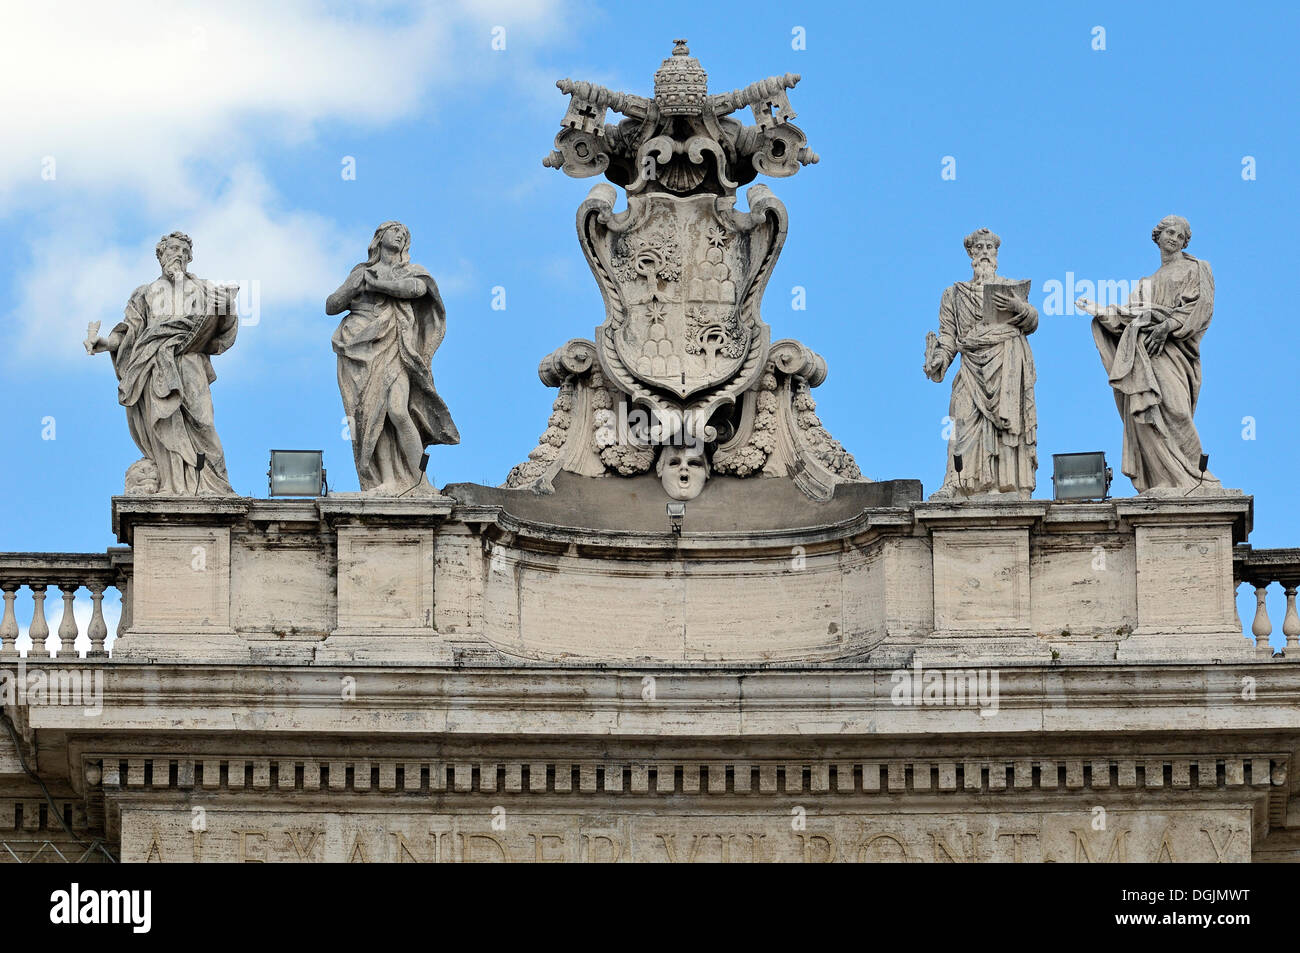 Pope's insignia between four statues of saints on the colonnades, St. Peter's Square, Vatican City, Rome, Latium region, Italy Stock Photo